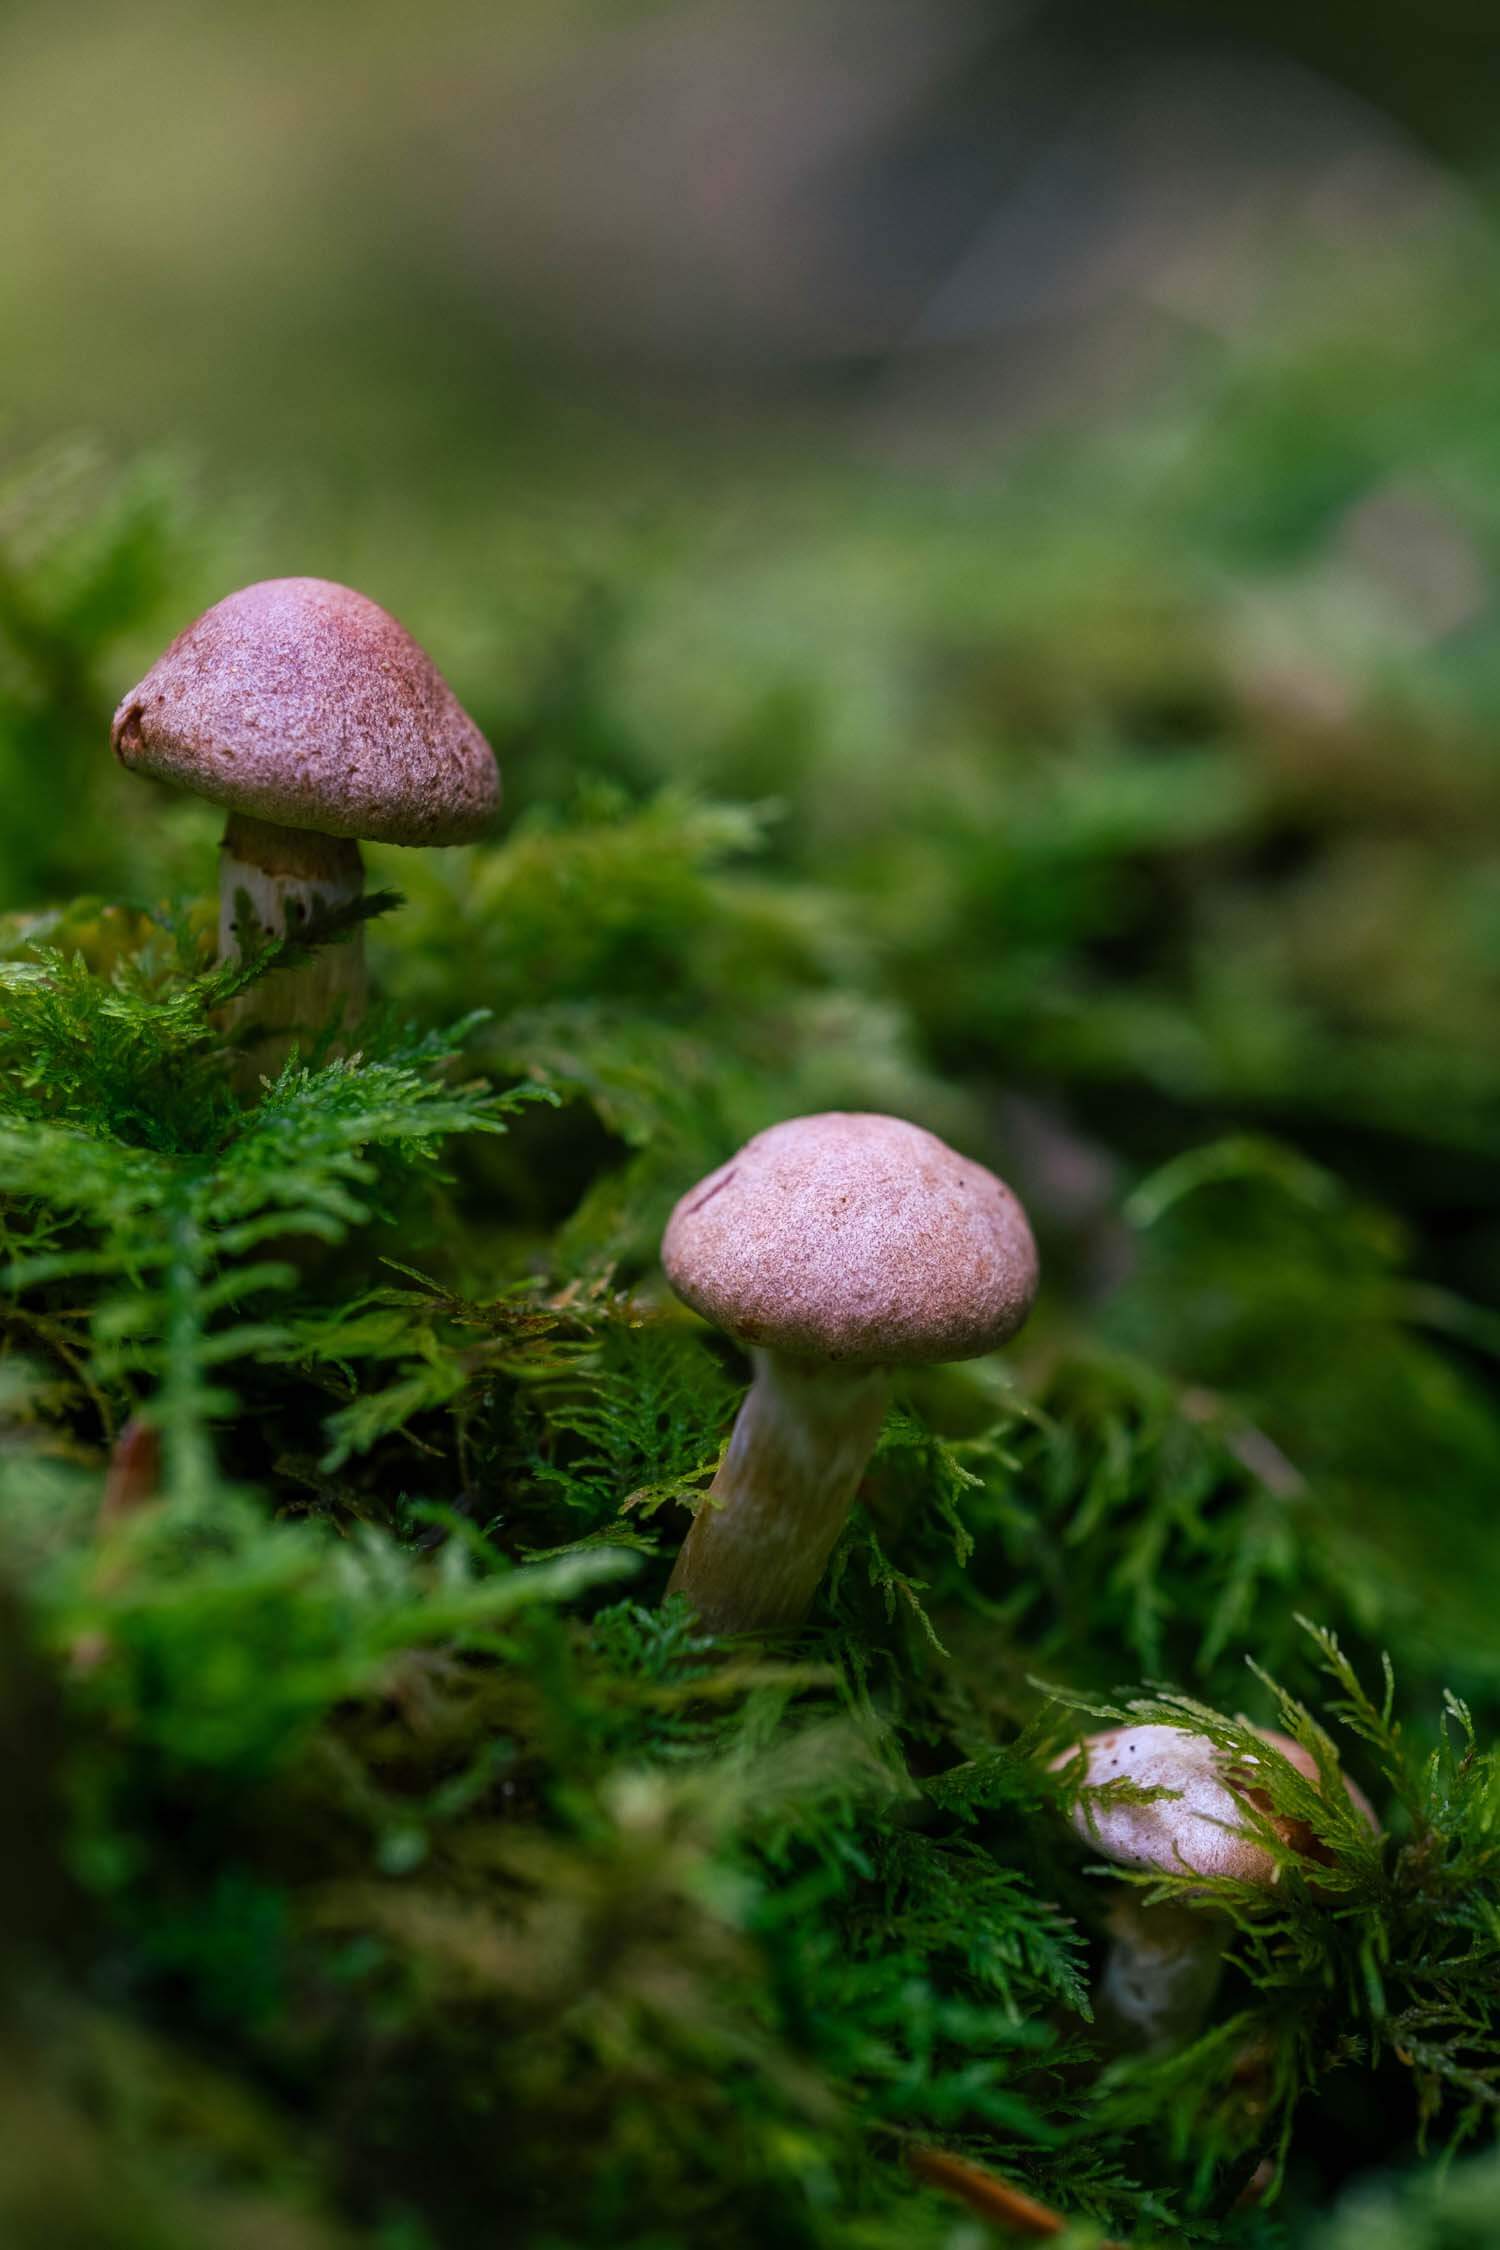 Two purple mushrooms in a bed of moss